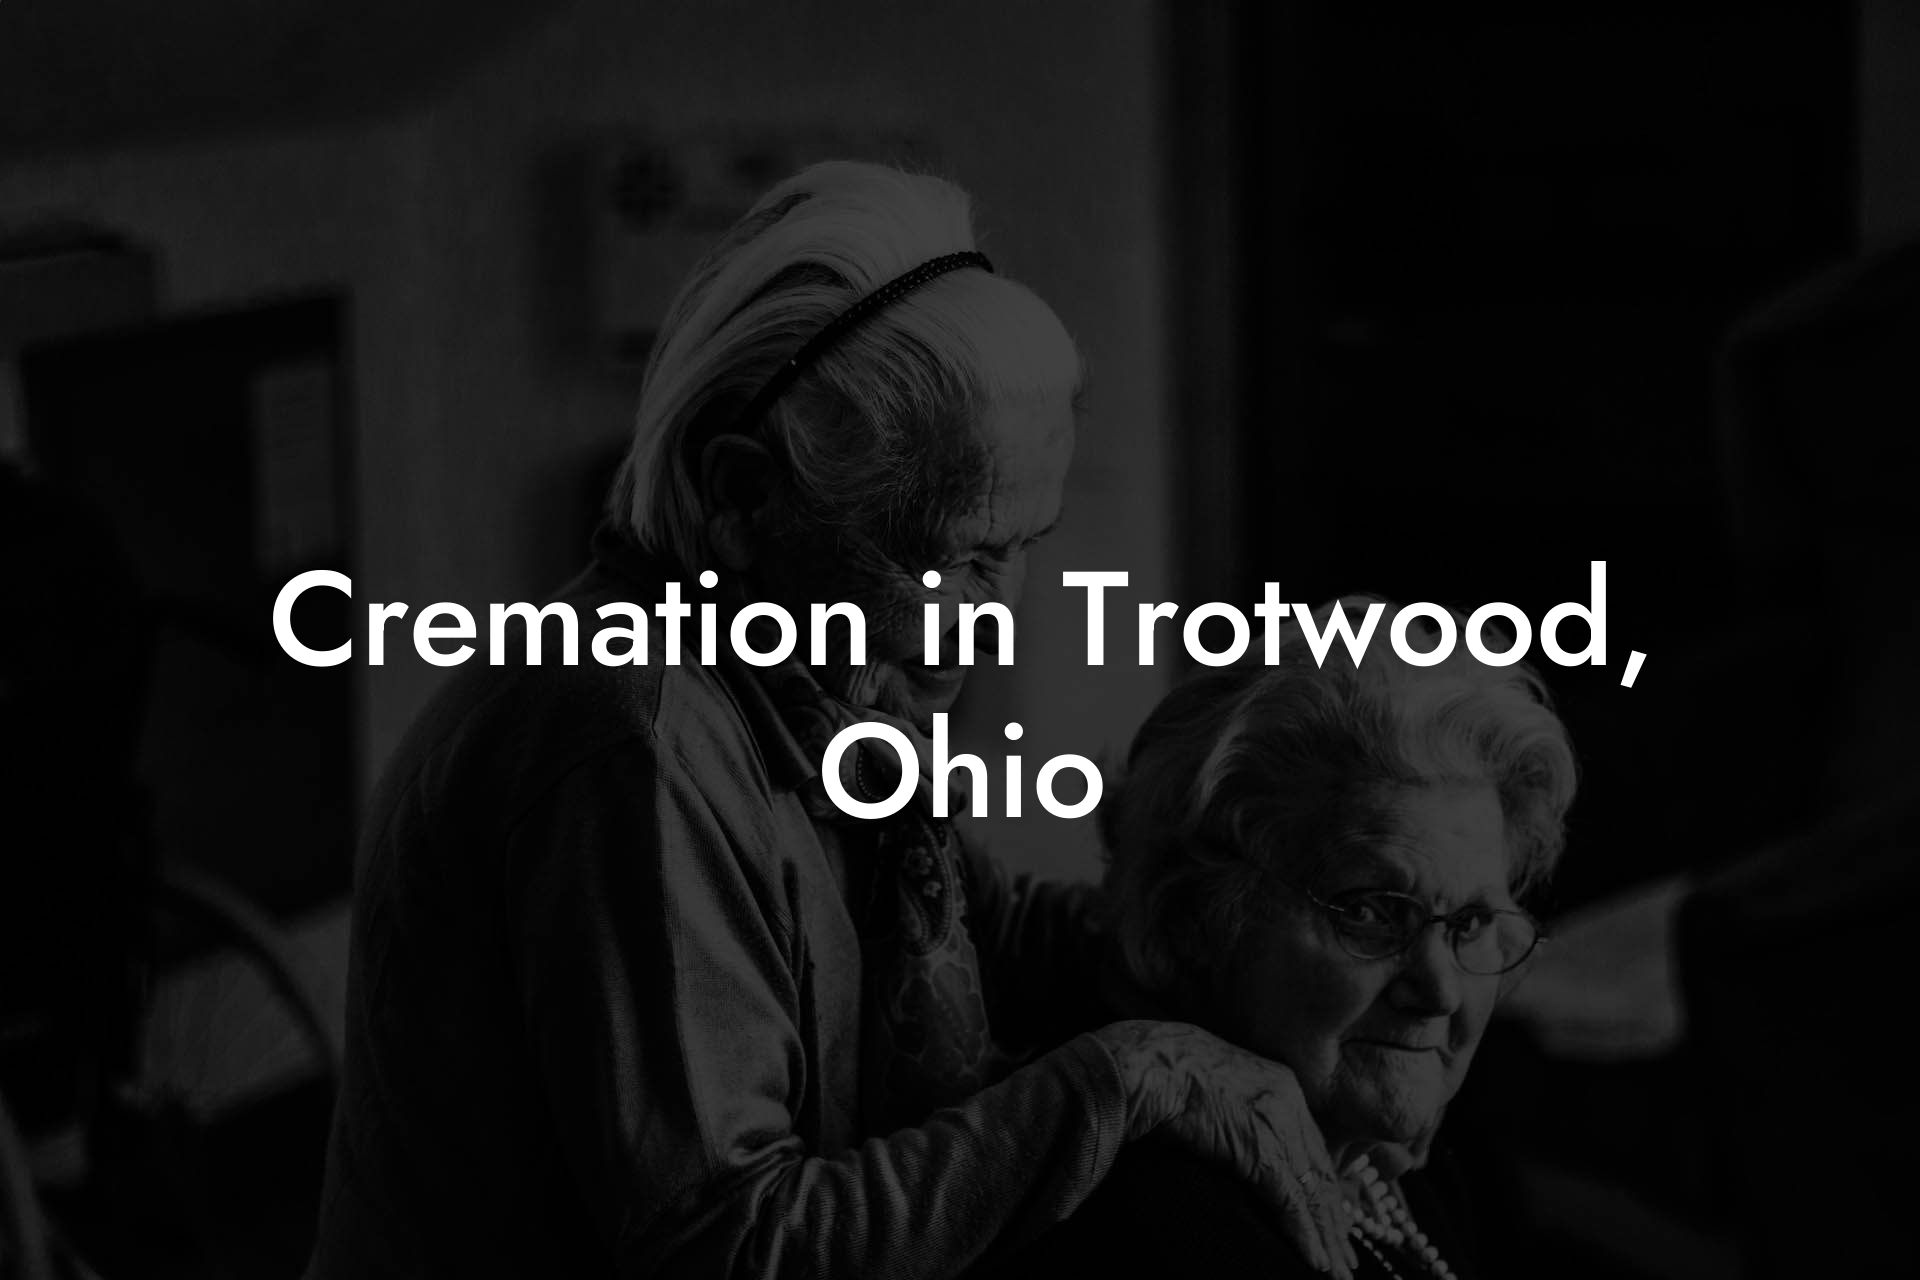 Cremation in Trotwood, Ohio